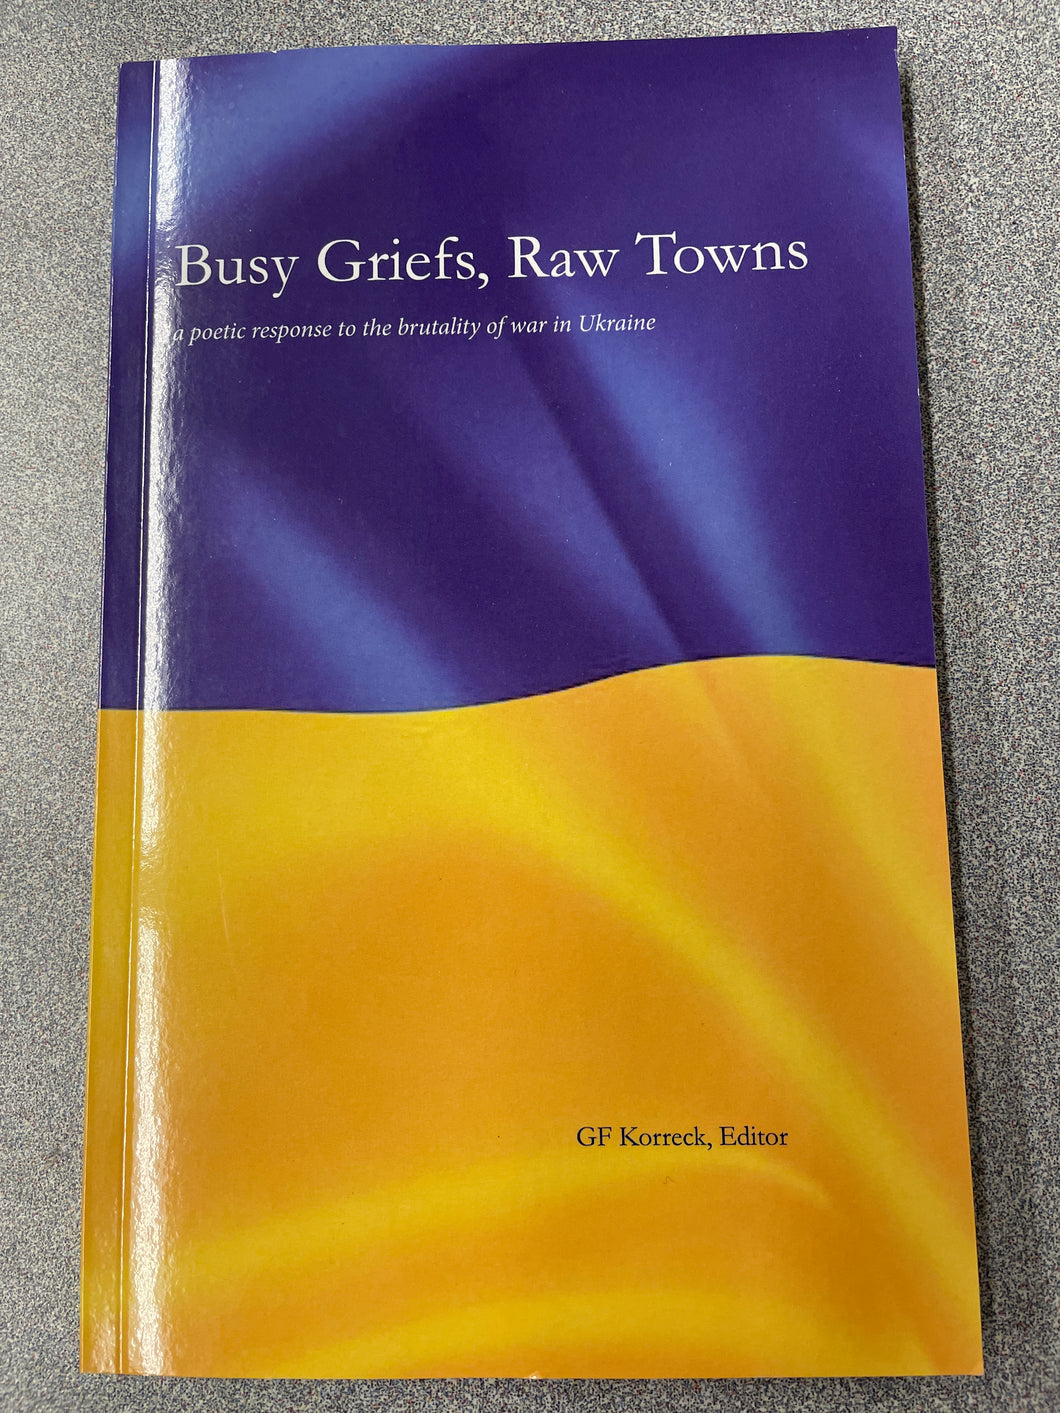 Busy Griefs, Raw Towns: a Poetic Response to the Brutality of War in Ukraine, Korreck, G.F., ed., [2022] P 4/24